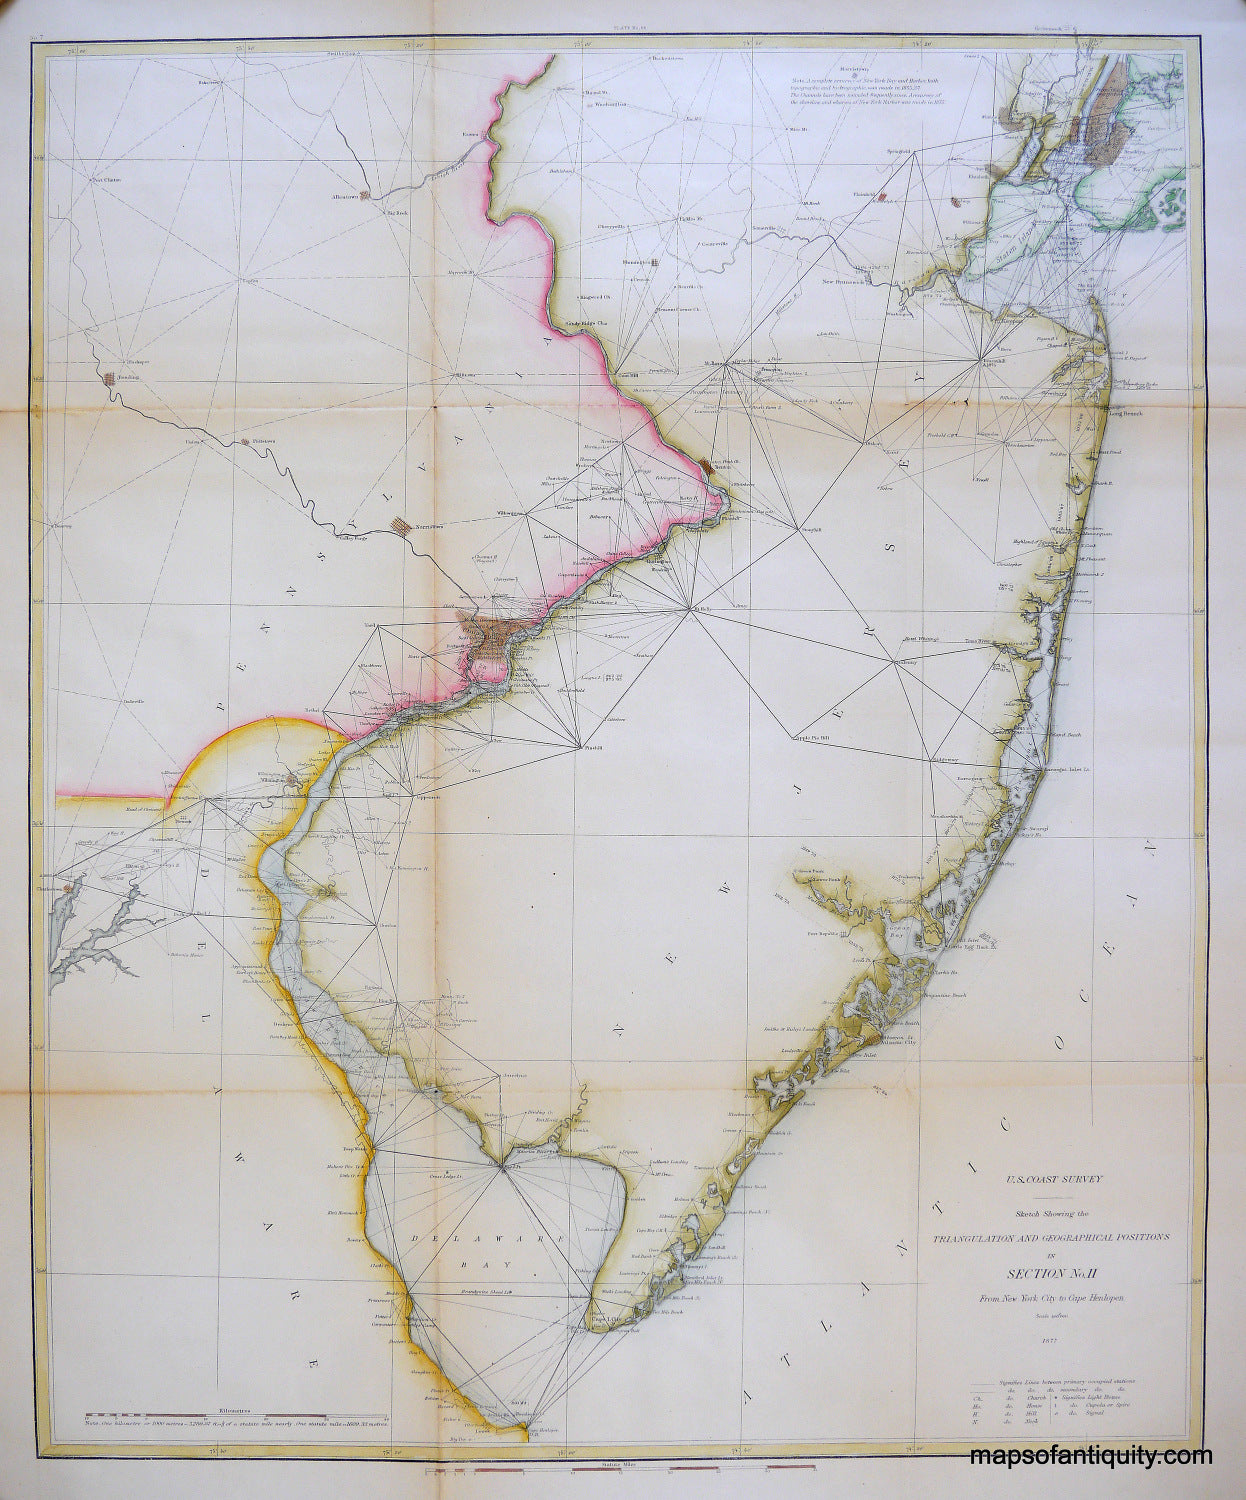 Hanc-Colored-Antique-Coastal-Chart-From-New-York-City-to-Cape-Henlopen--Sketch-Showing-the-Triangulation-&-Geographical-Positions-in-Section-No.-II-**********-United-States-Northeast-1877-U.S.-Coast-Survey-Maps-Of-Antiquity